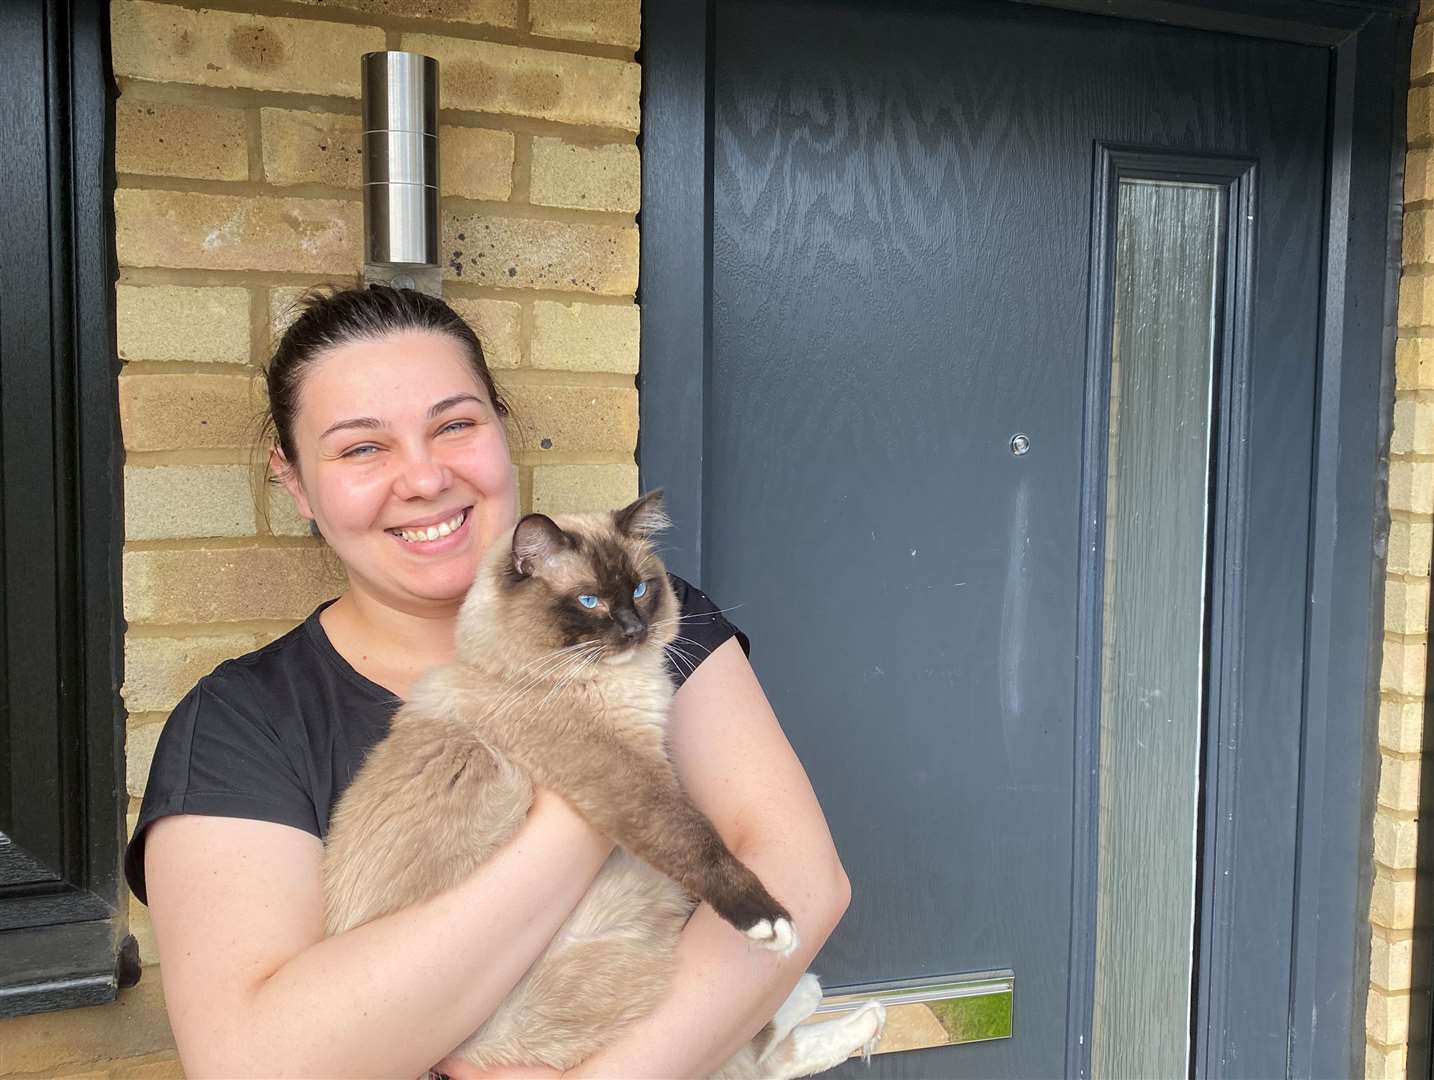 Kirolina Buvoczynsko moved into her home in Alkerden Heights Swanscombe two weeks ago